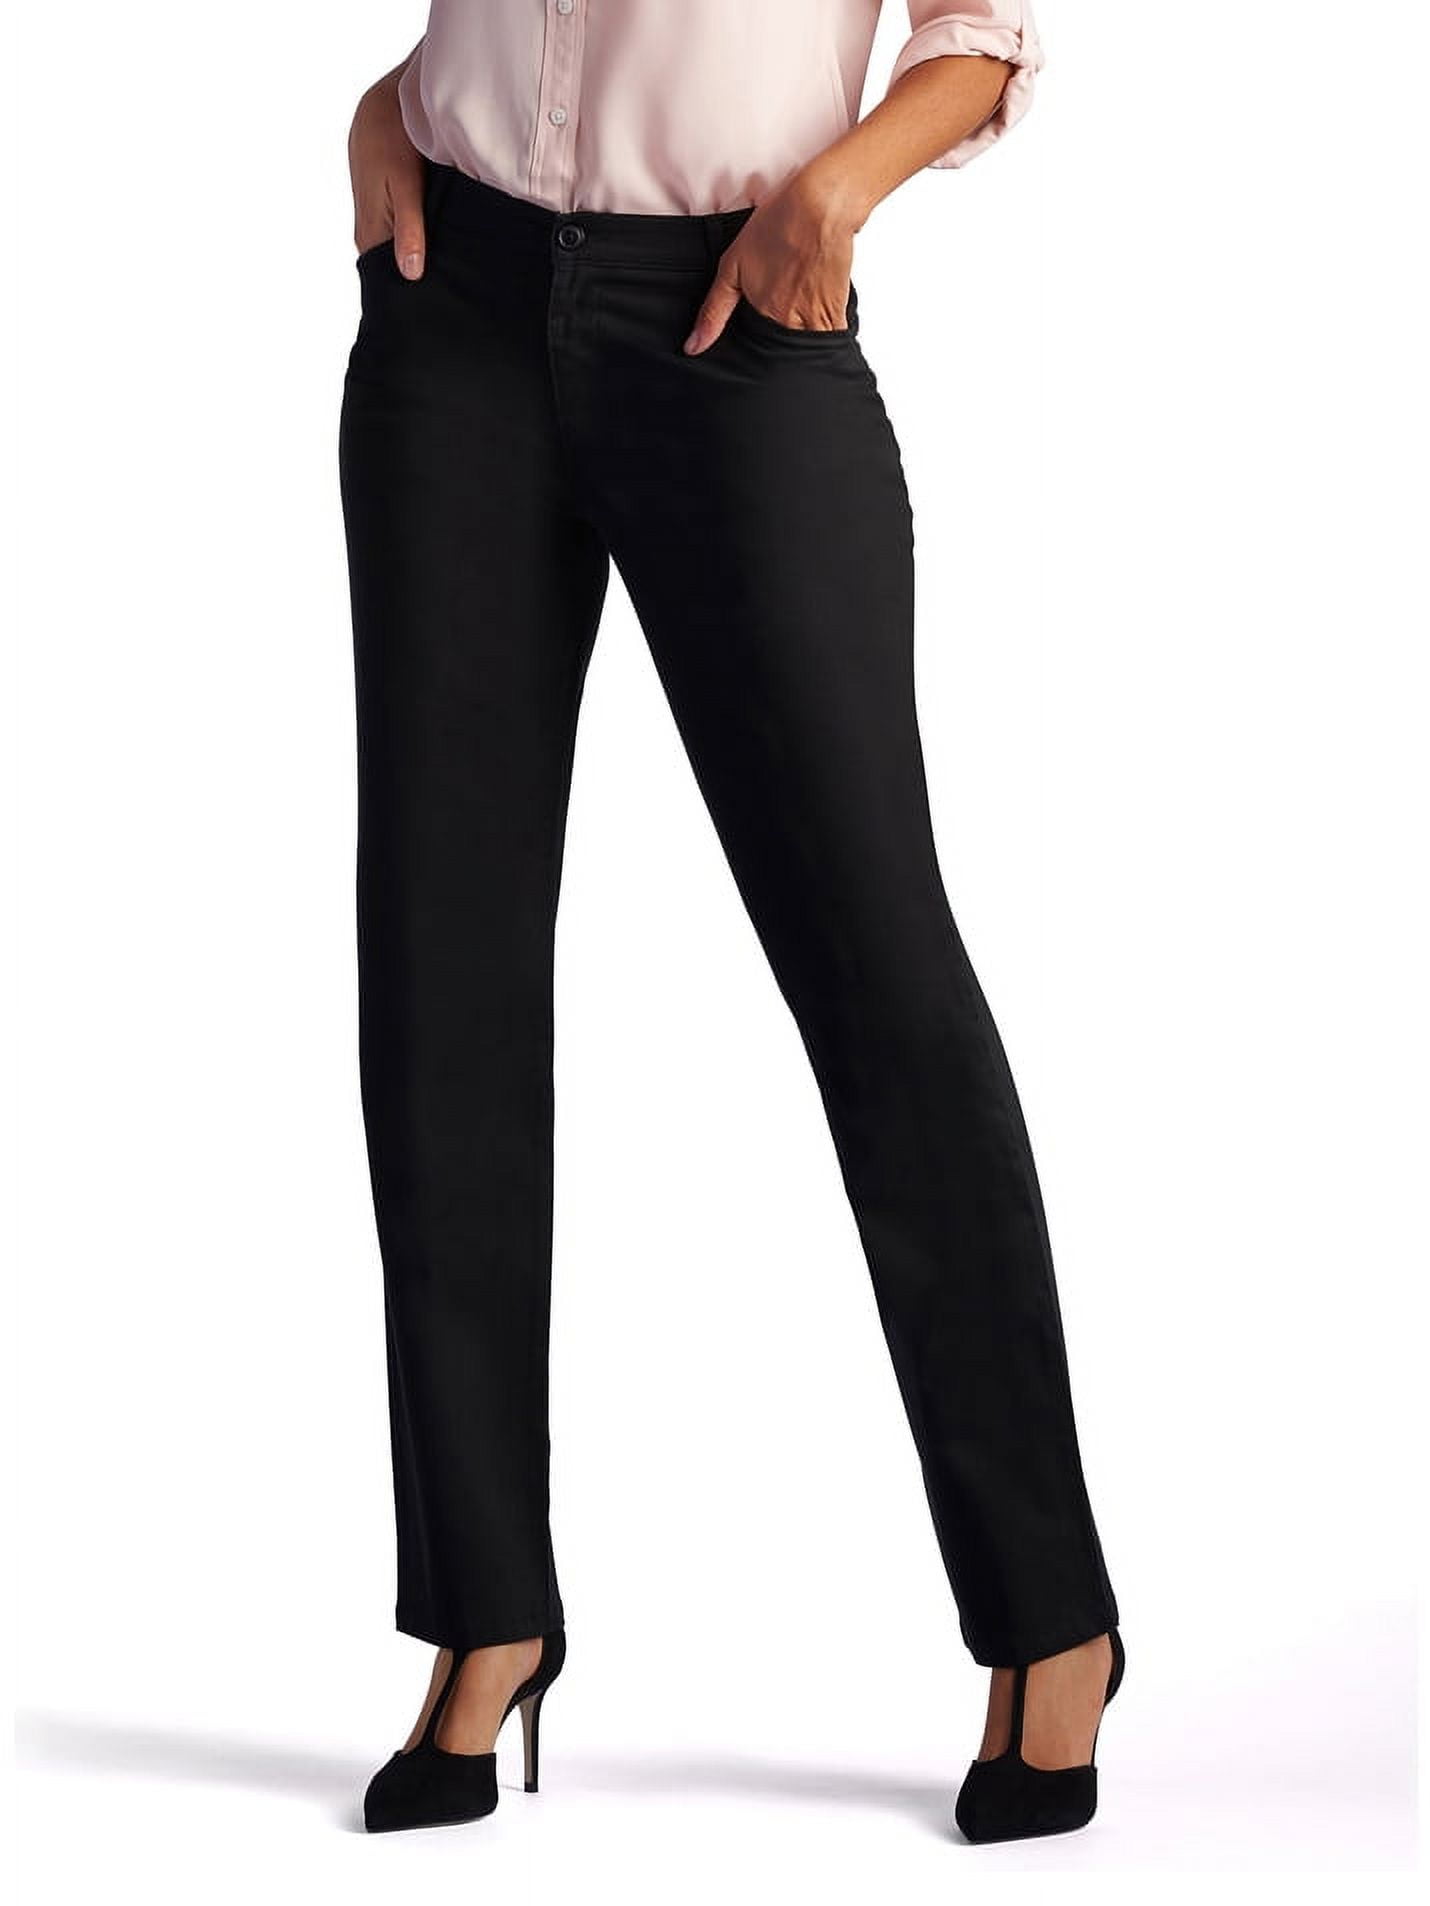 Lee Women's Relaxed Fit Straight Leg Pant - Walmart.com